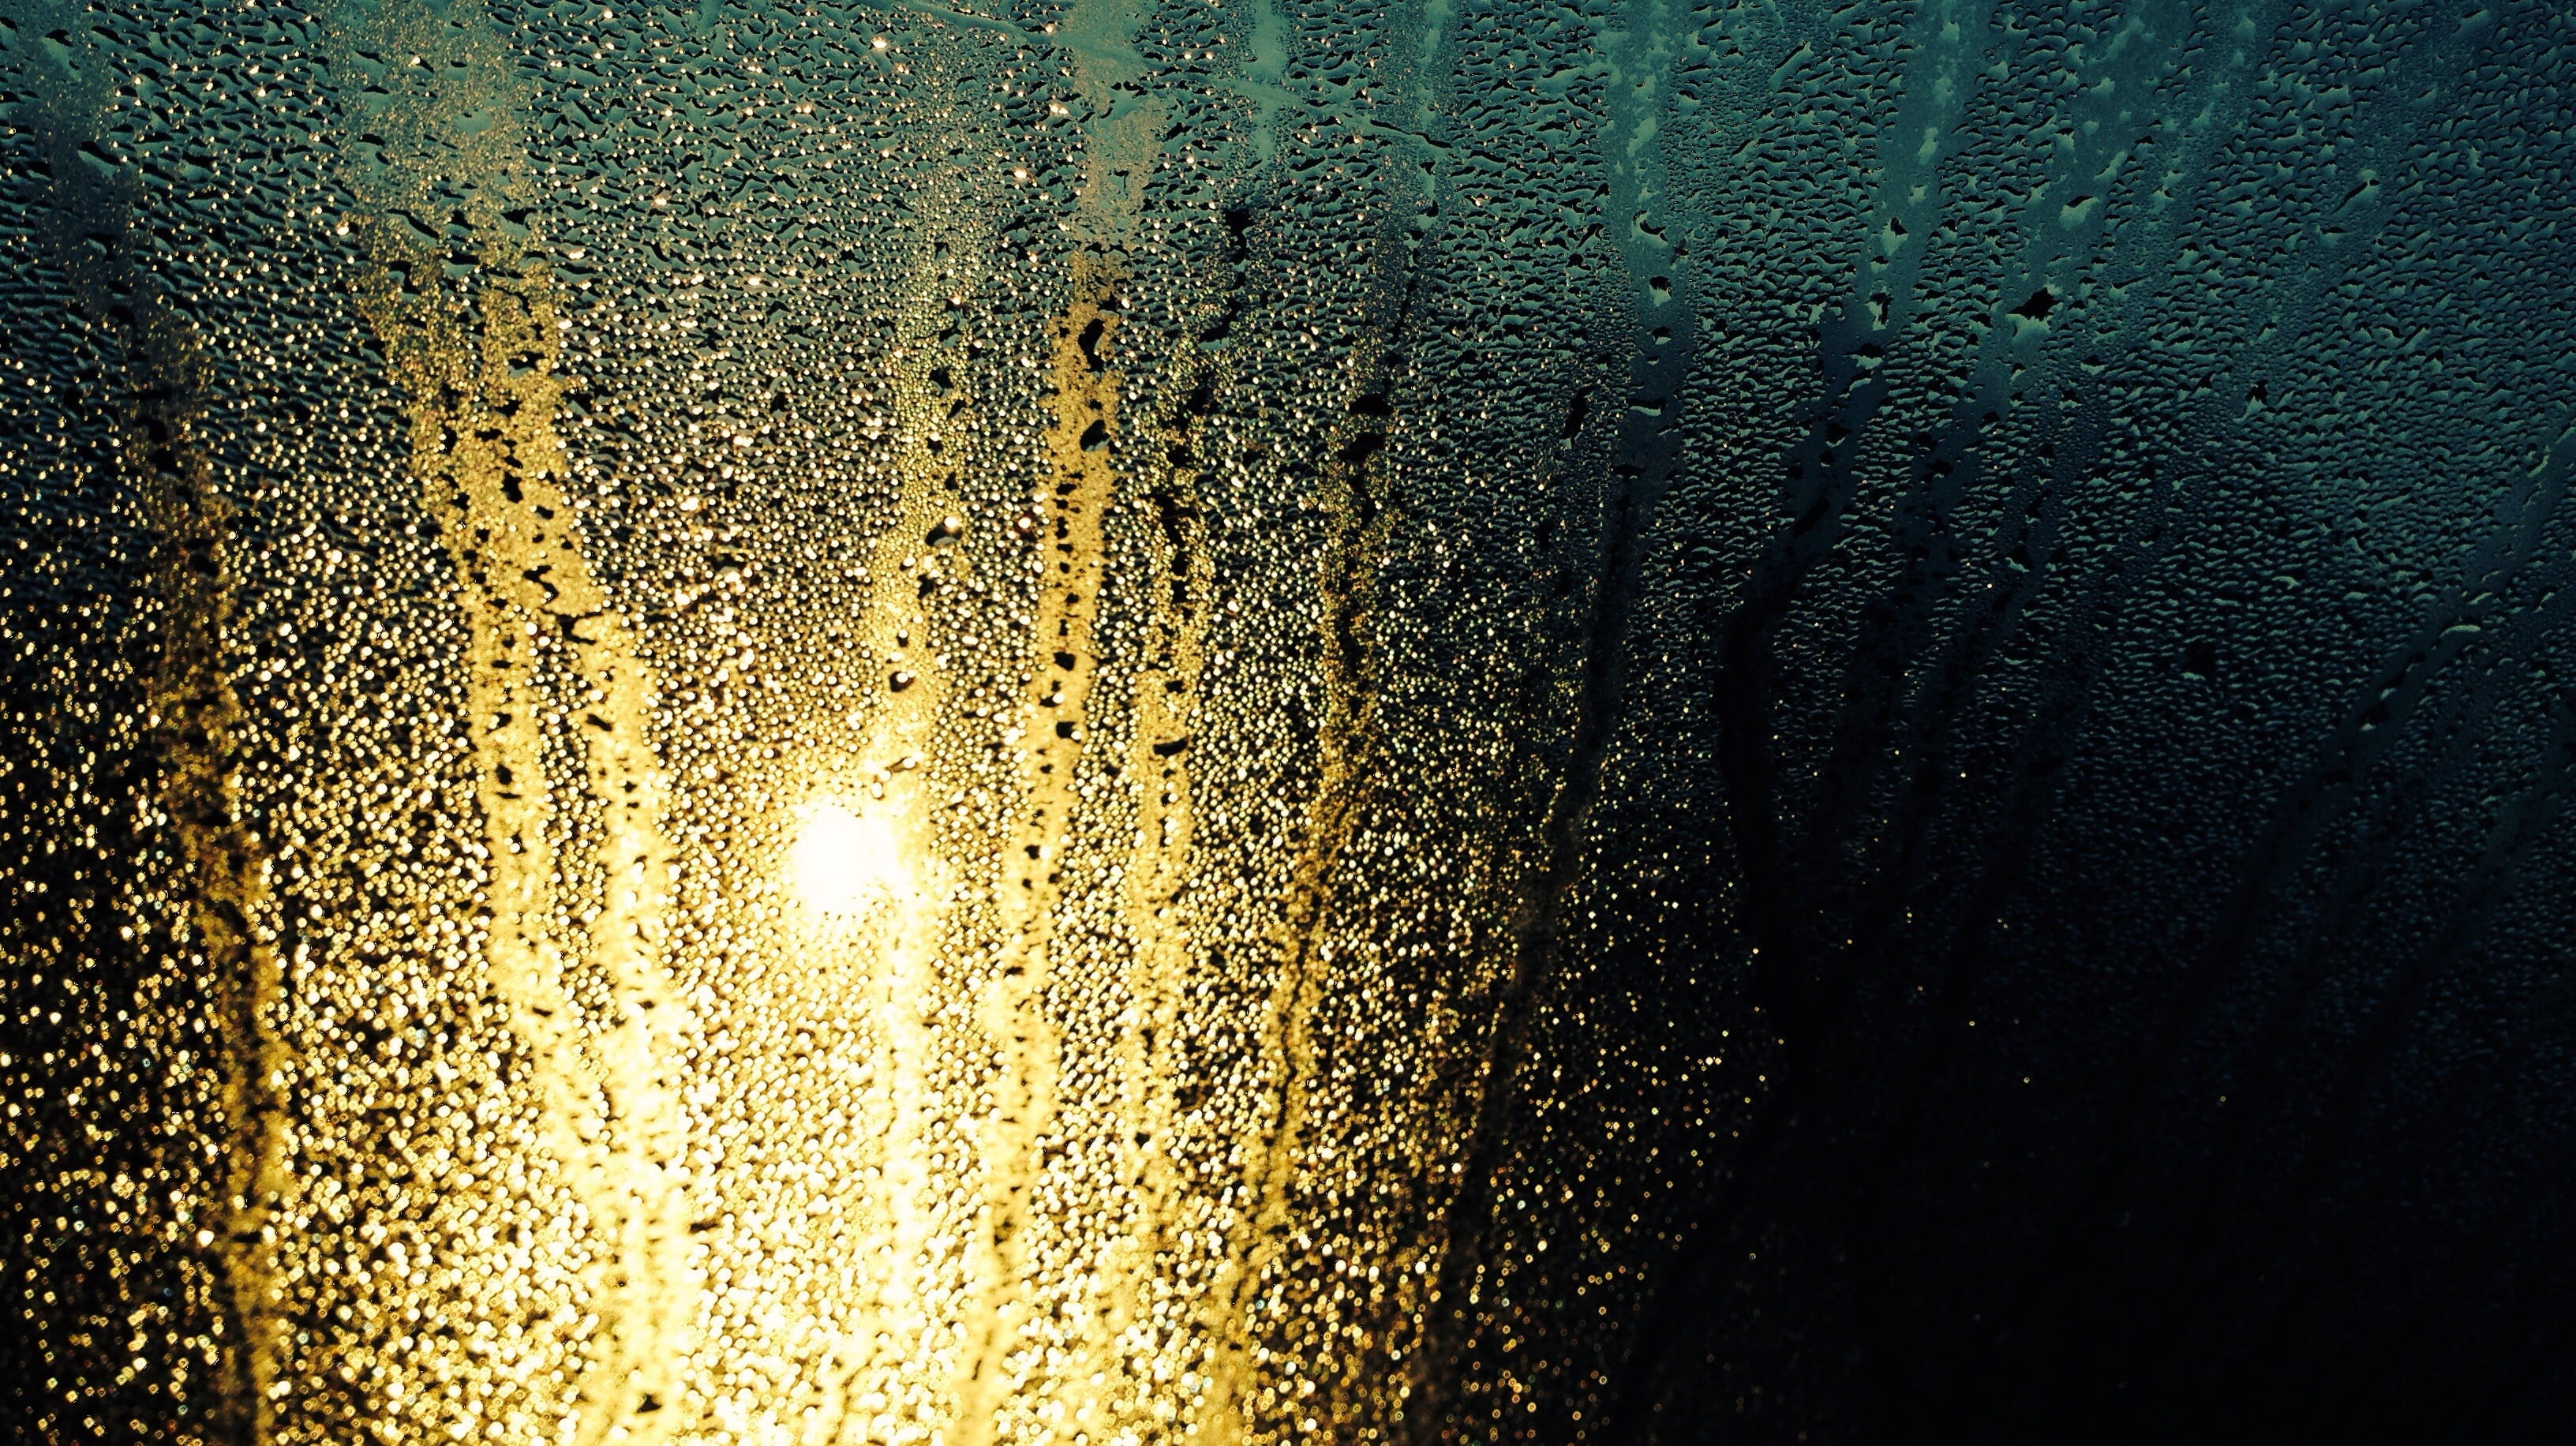 untitled, rain, water drops, water on glass, wet, glass - material